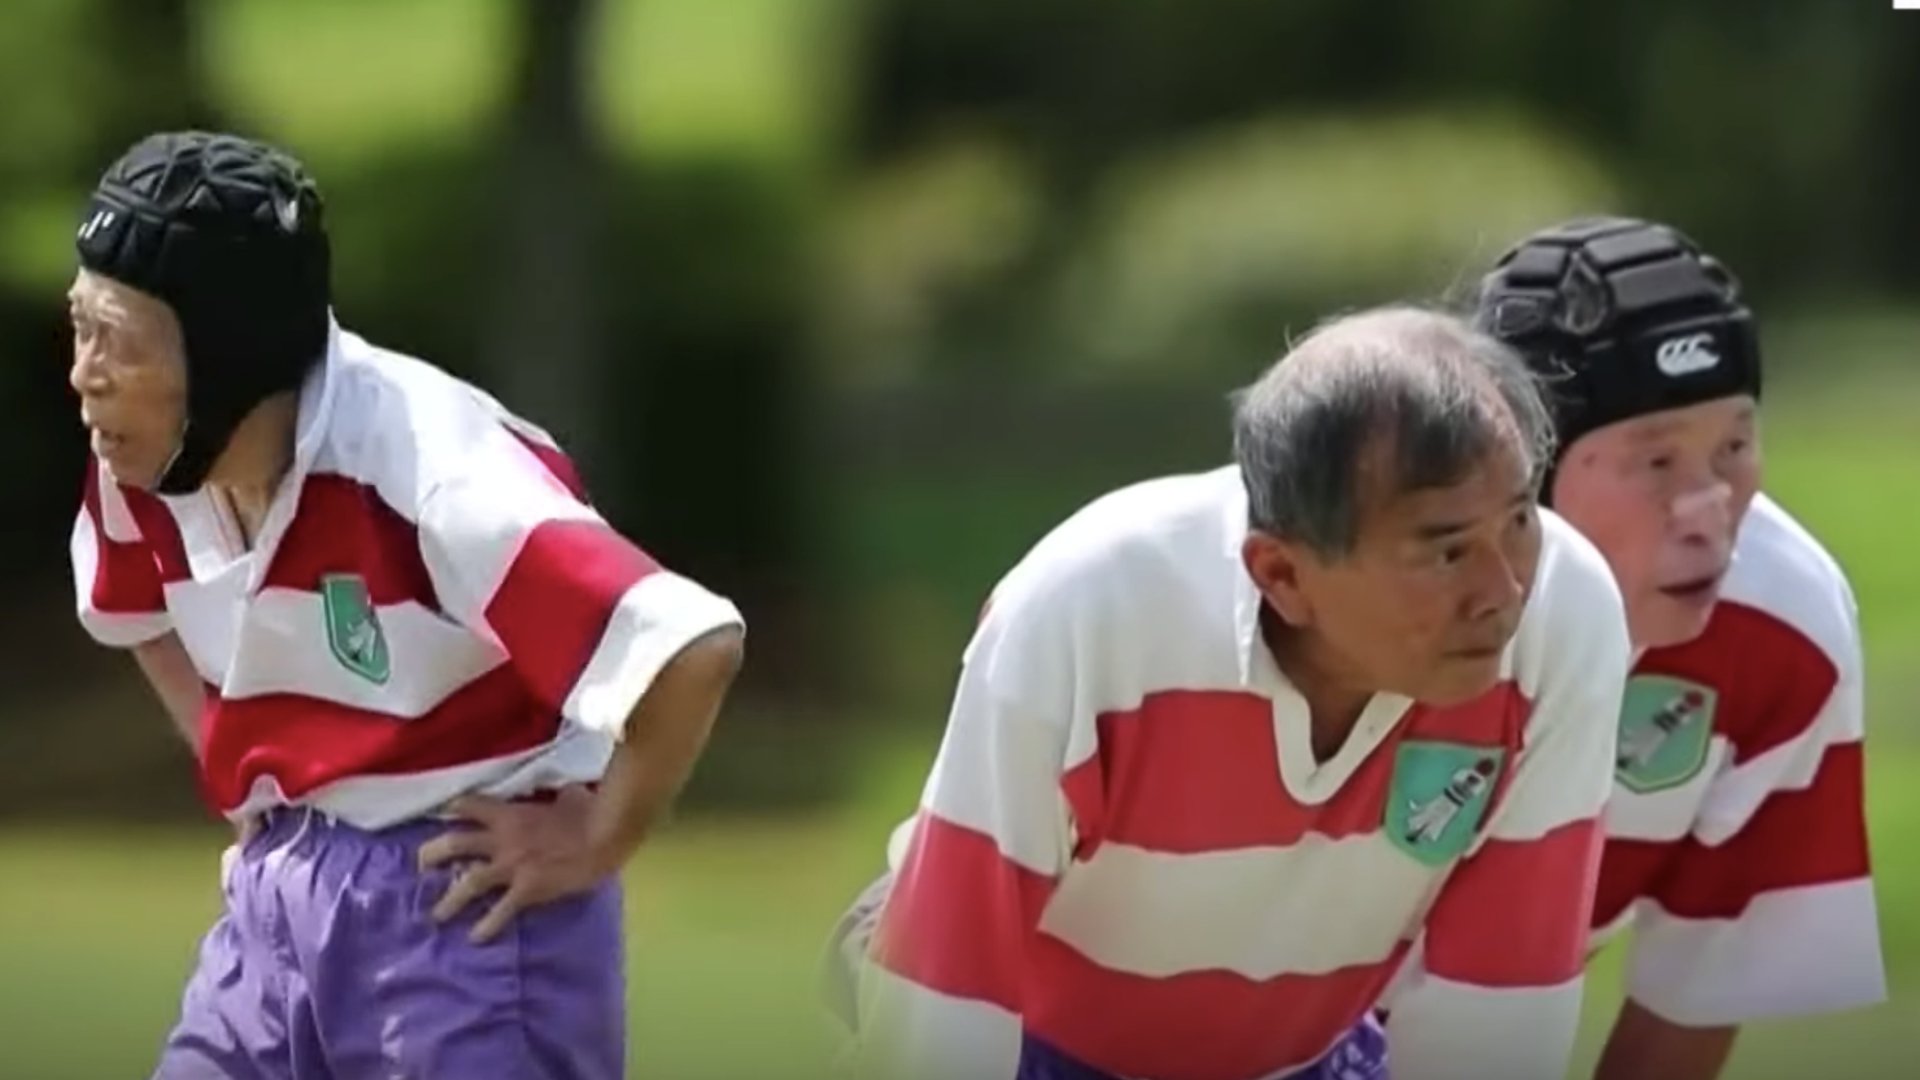 WATCH: The Japanese veteran rugby team that has an 86-year-old player